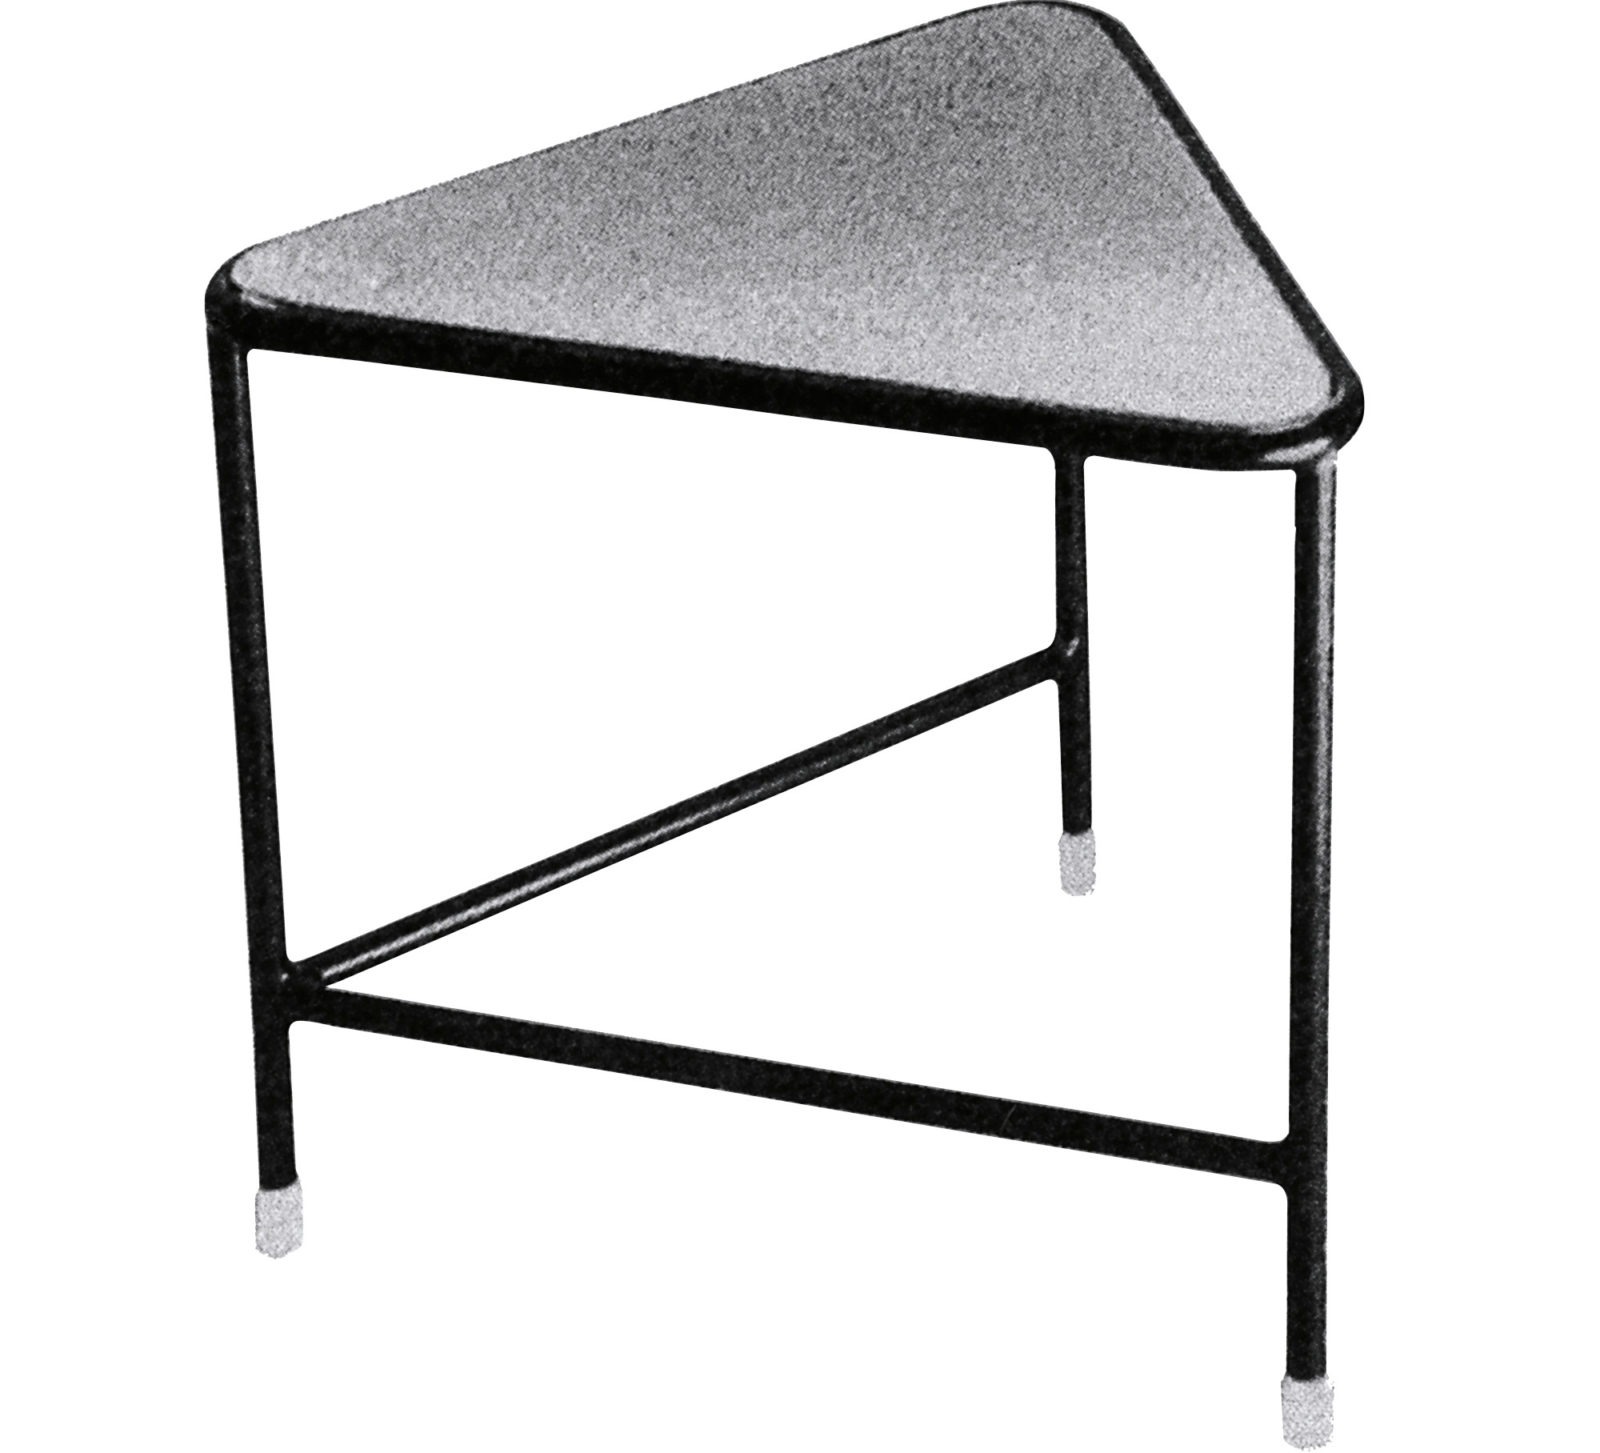 Small table with triangular top, IKEA PEGGY.